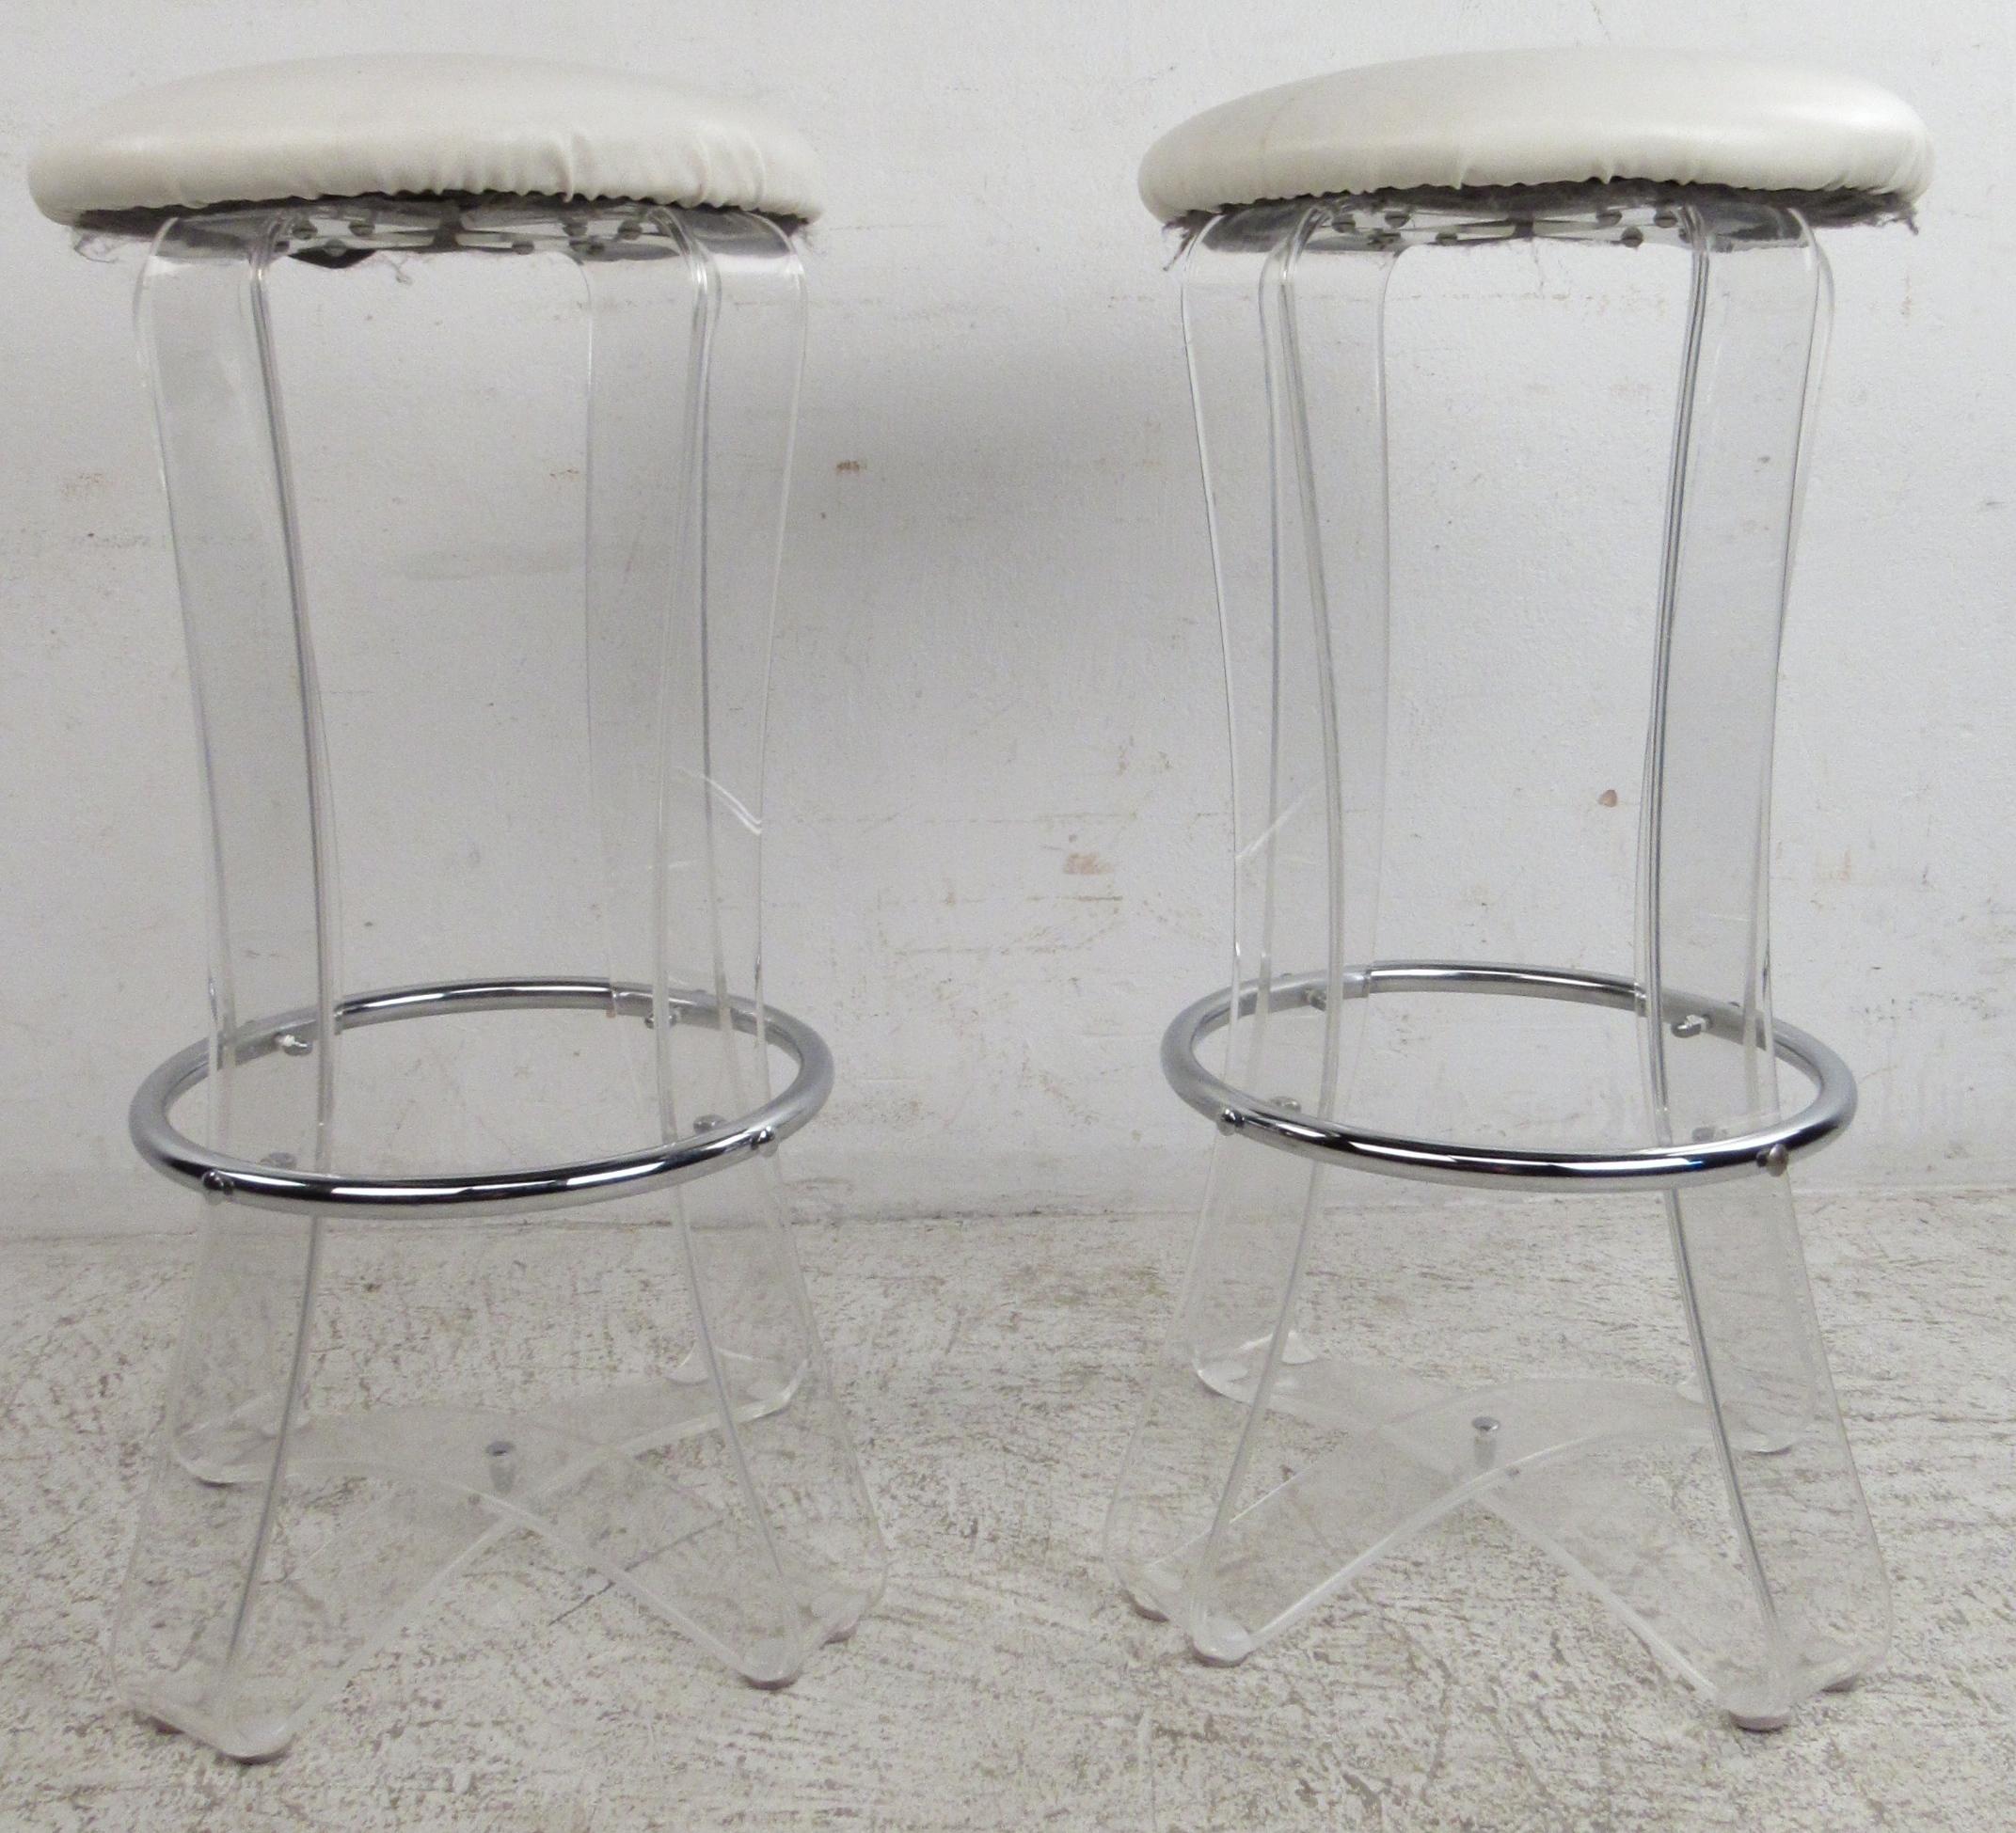 A pair of Mid-Century Modern bar stools. Their simple lucite and vinyl design are perfect for any setting. 

Confirm pickup location (NY/NJ).